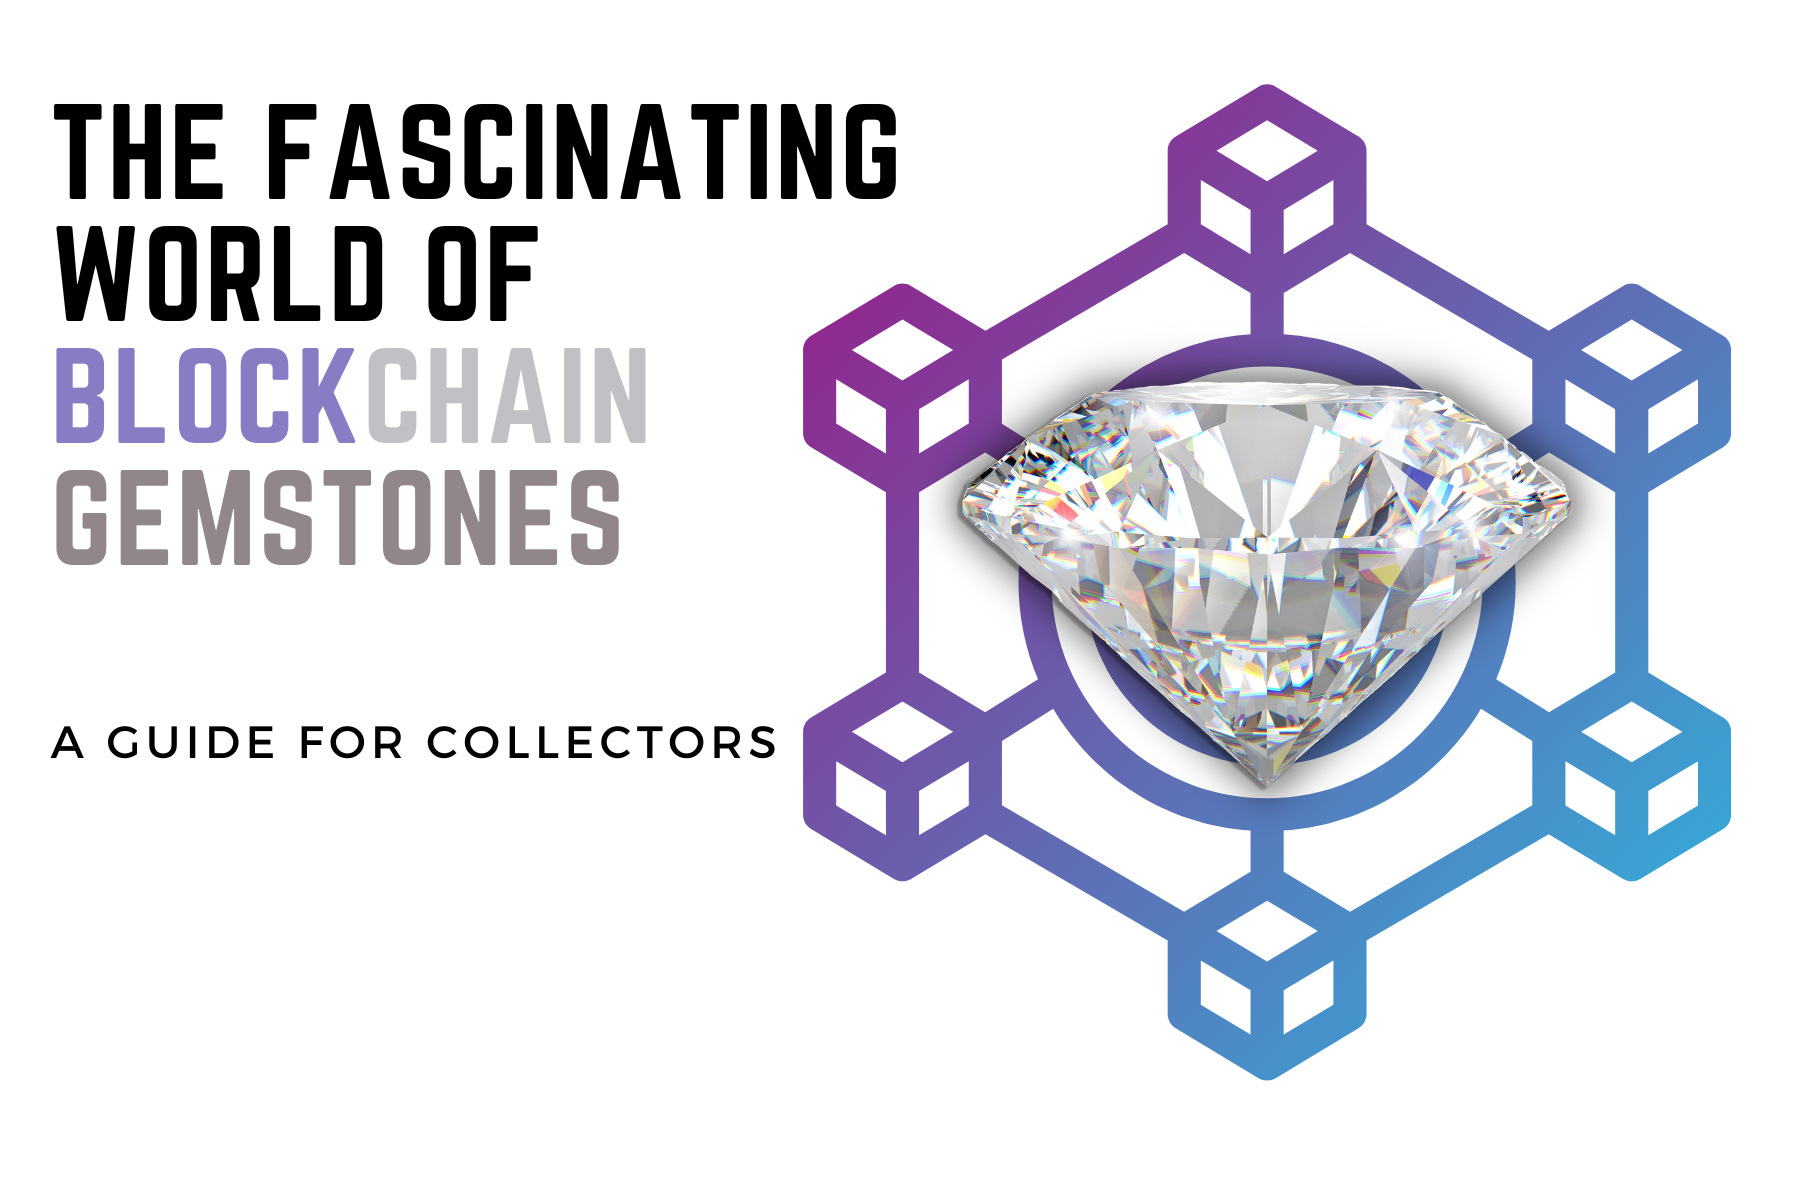 The Fascinating World Of Blockchain Gemstones - A Guide For Collectors